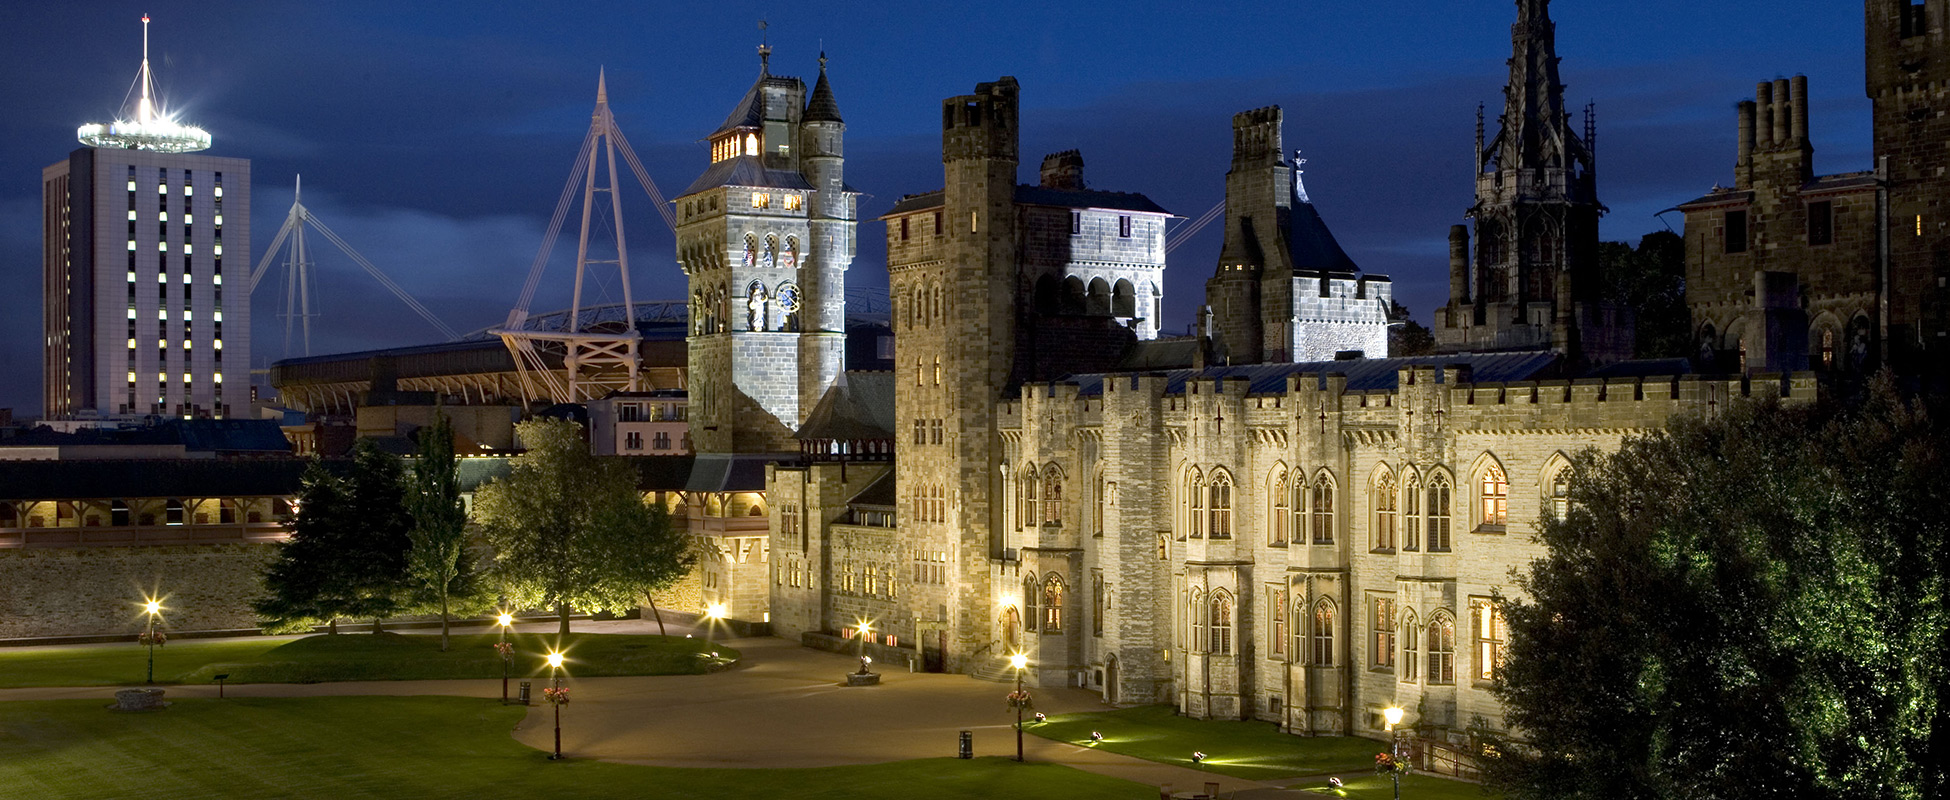 Cardiff Castle at night